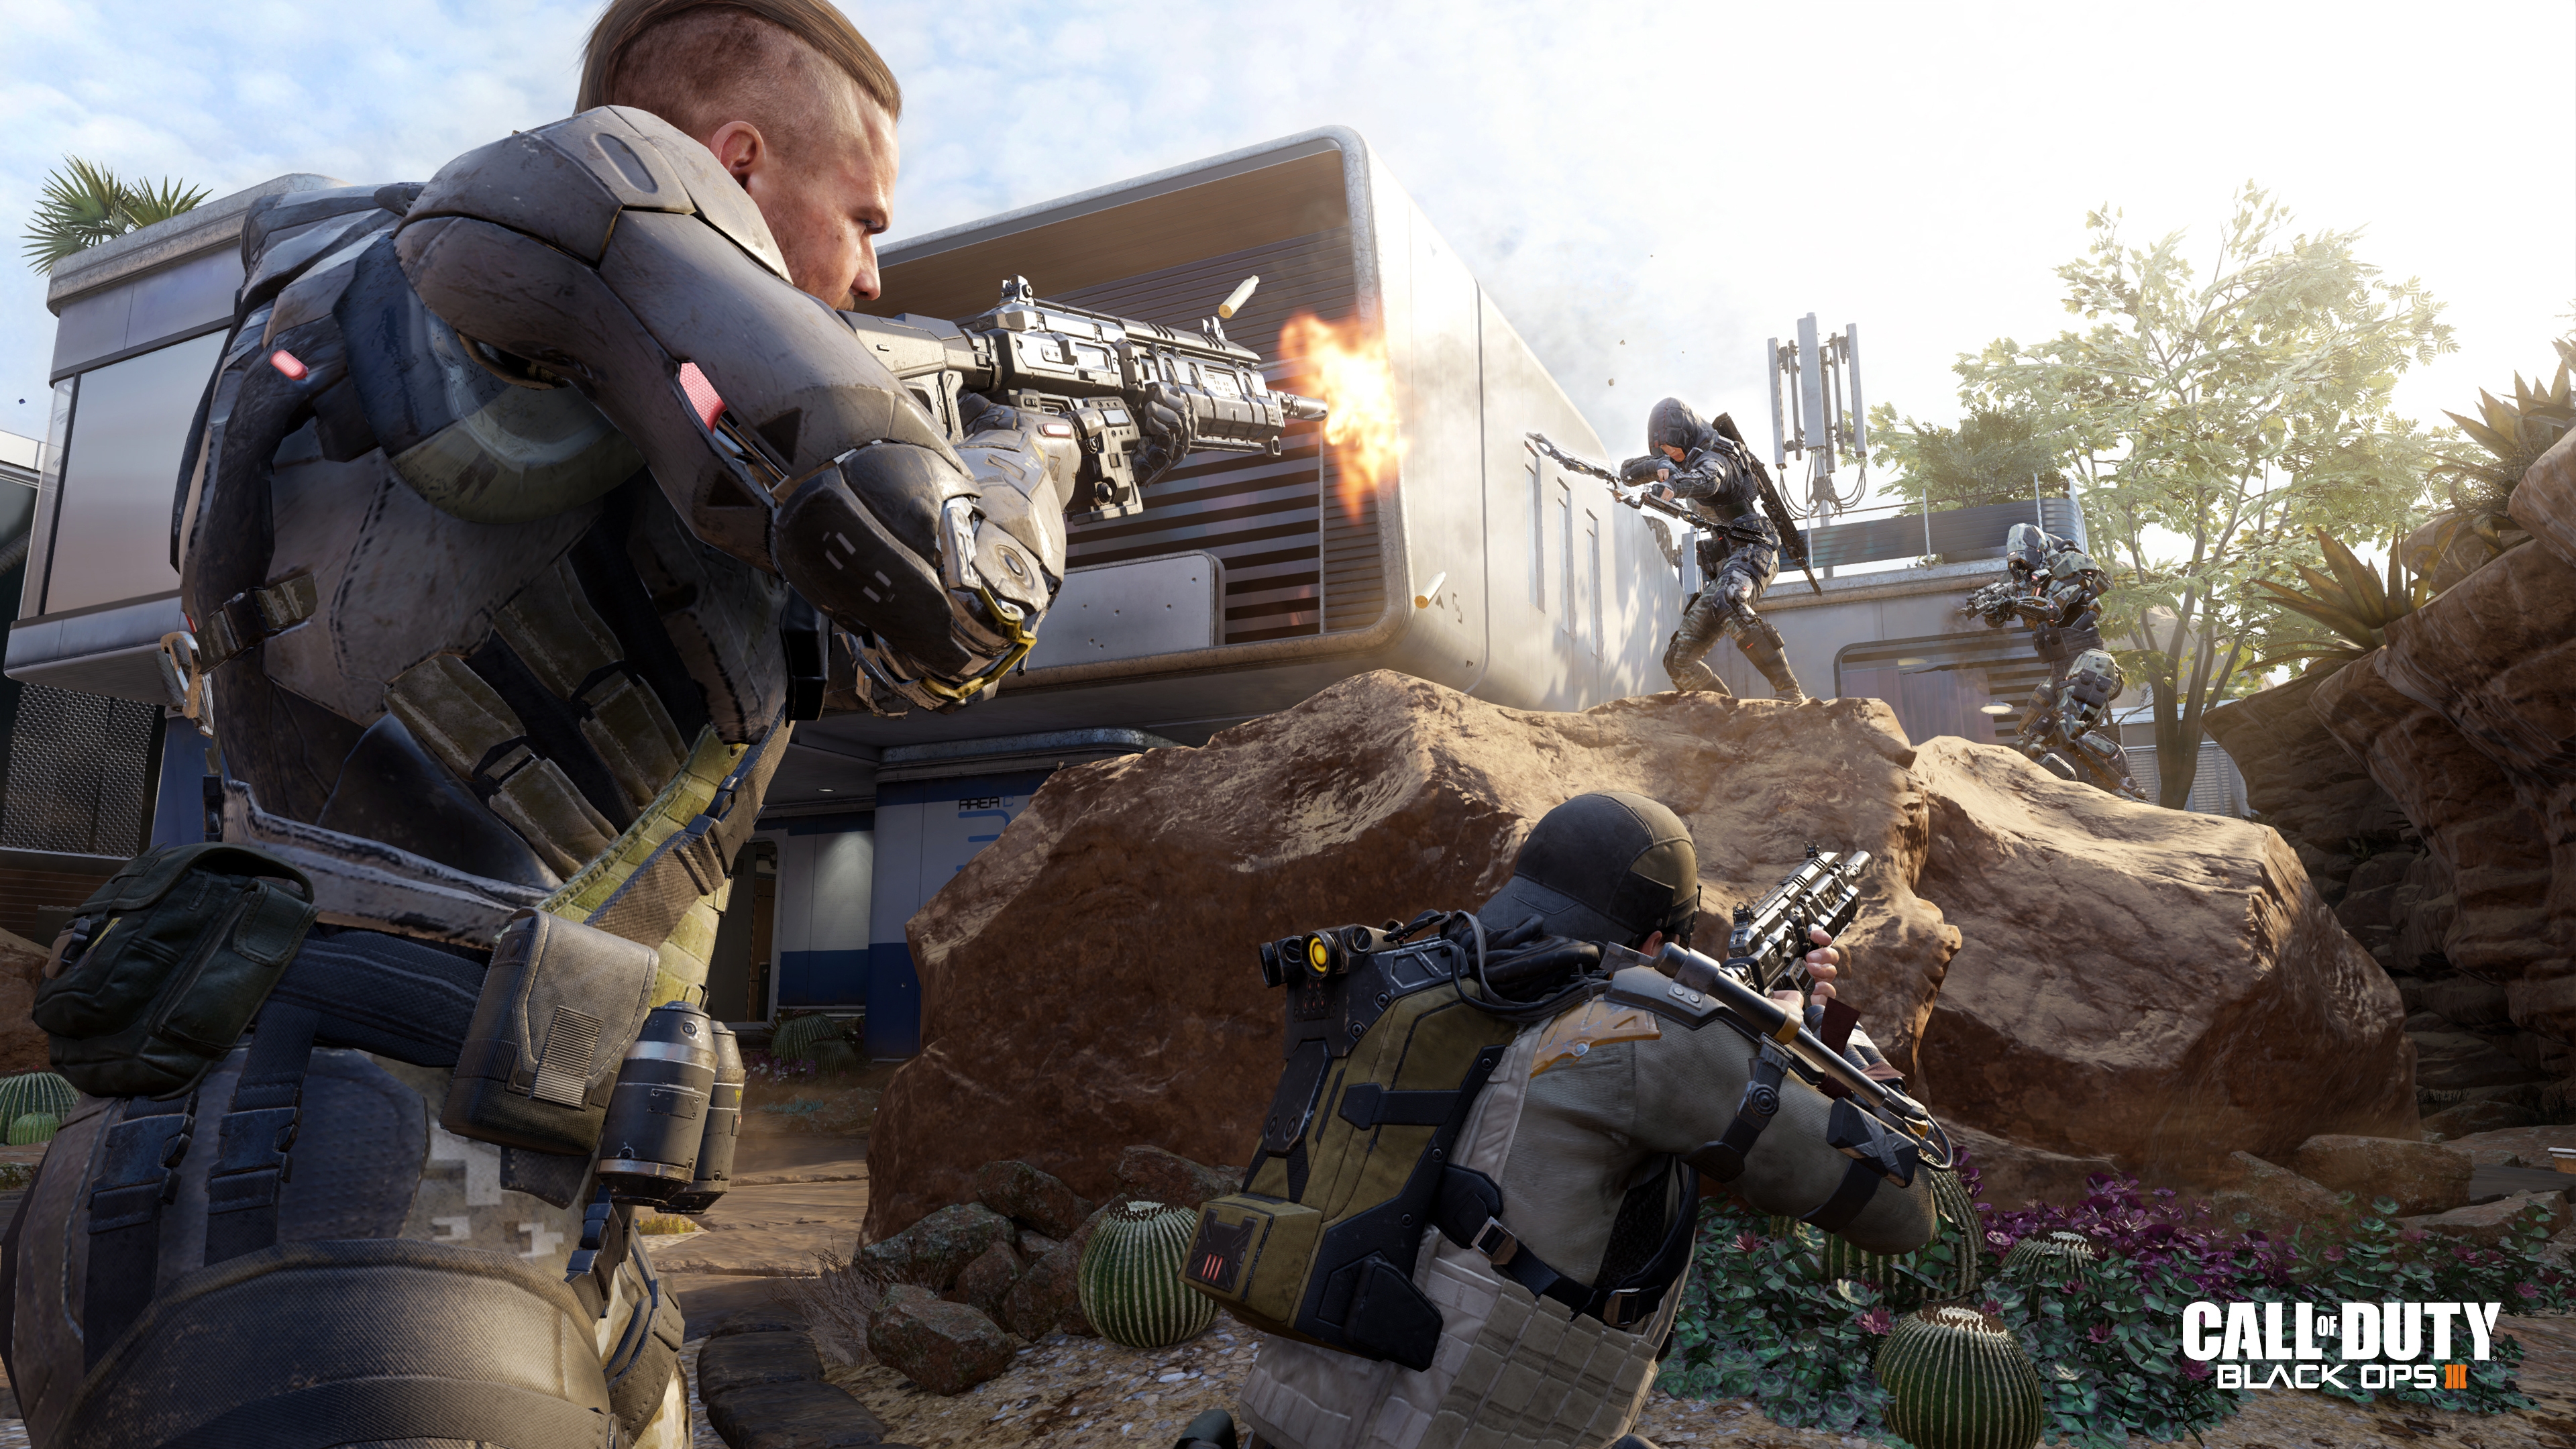 Call of Duty Black Ops III Fight for 3840 x 2160 Ultra HD resolution